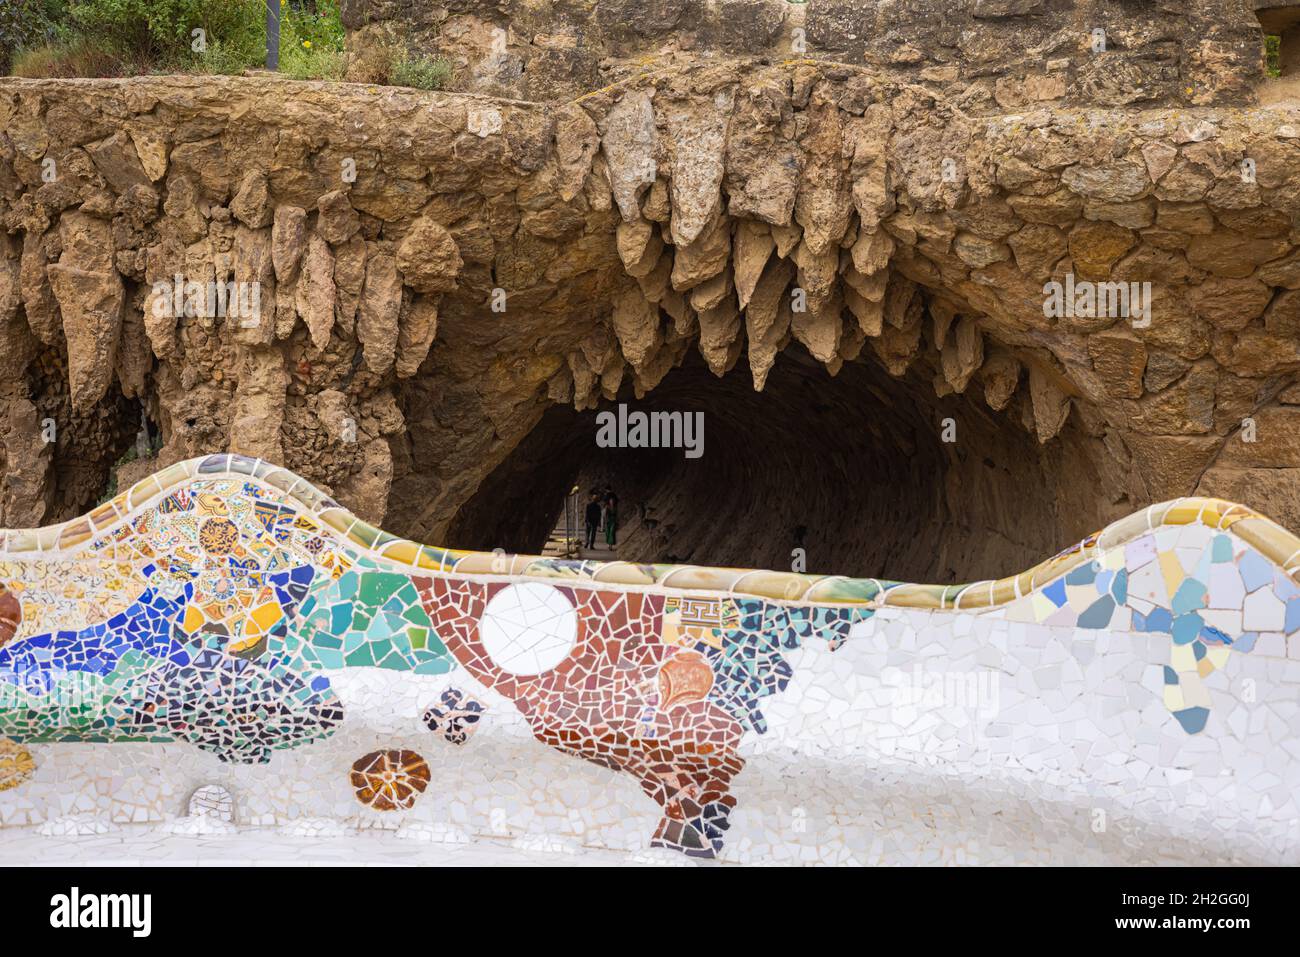 Barcelona, Spain - September 22, 2021: The Parc Guell, located in La Salut at Carmel Hill. The architectural features of the park created by Gaudi Stock Photo